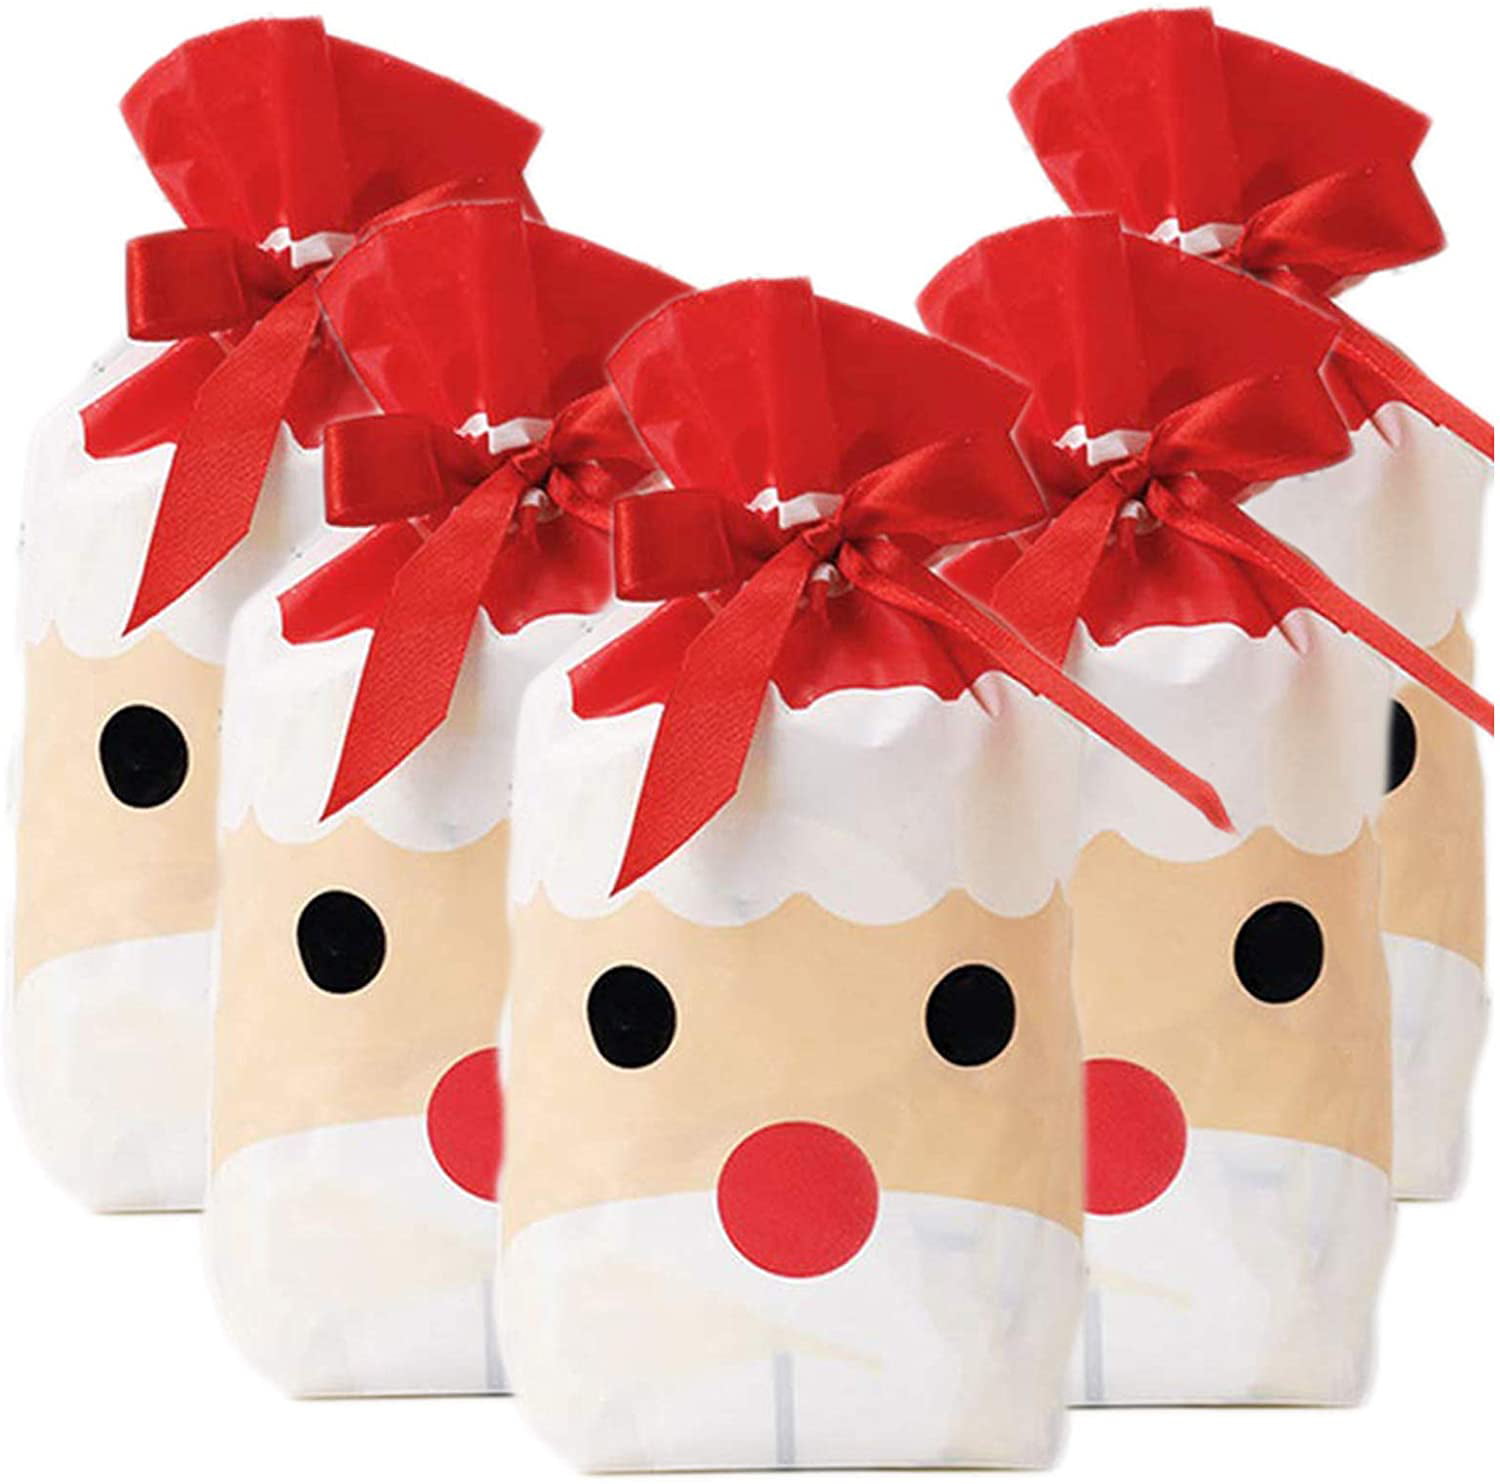 50 Pcs Christmas Candy Bags Christmas Drawstring Candy Bags Christmas Treat Bags Cookie Bags for Christmas Party Favor Gift Wrapping Supplies 